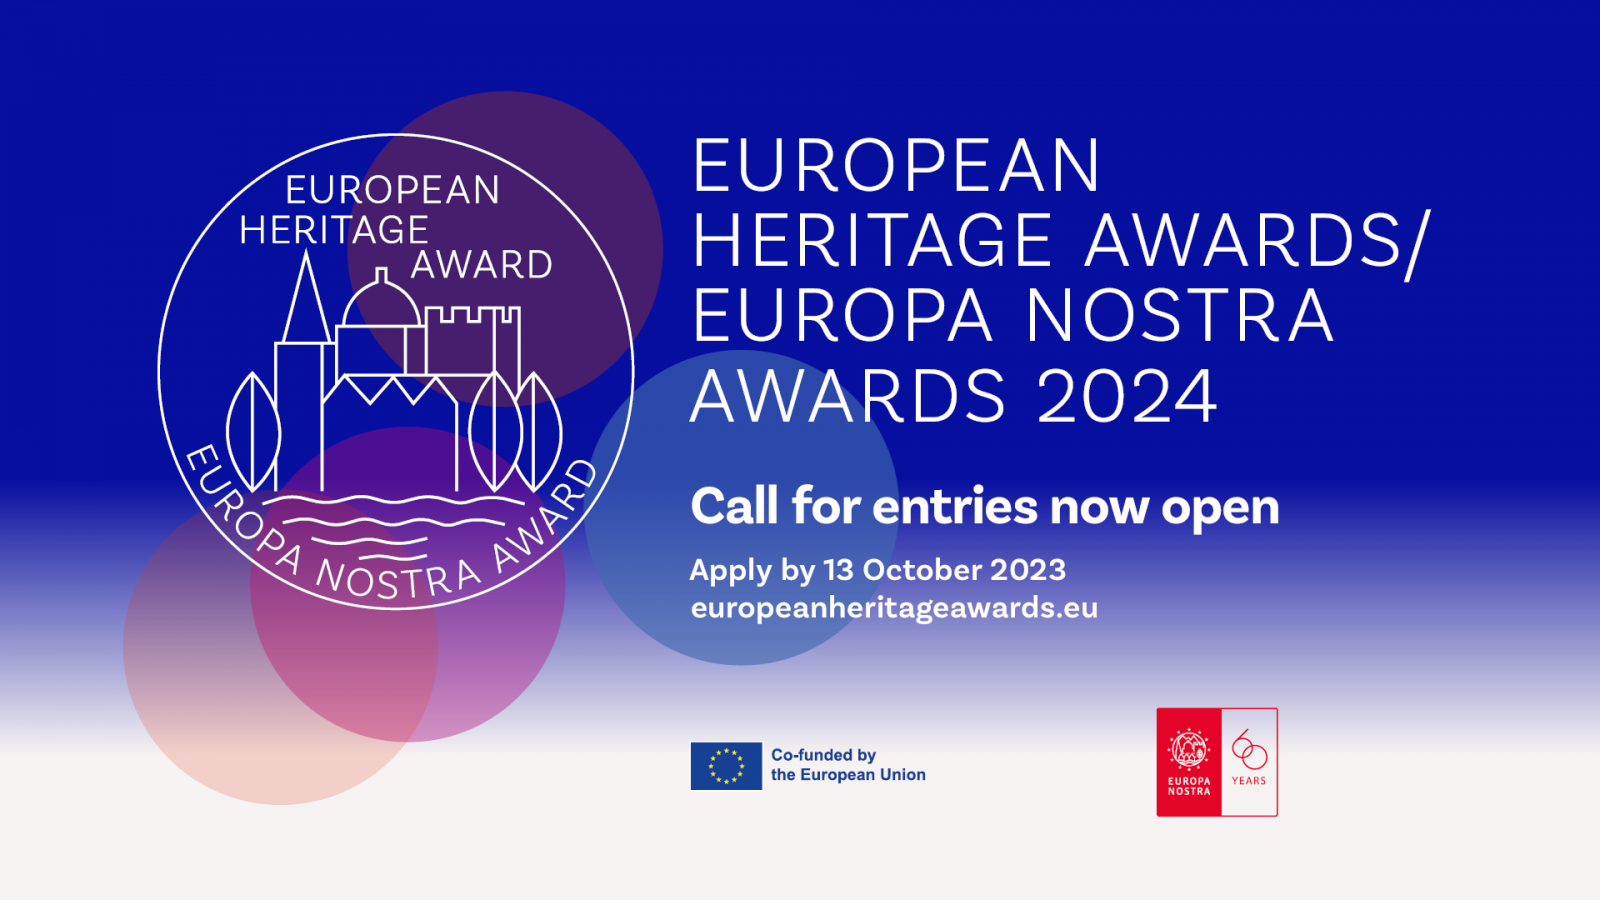 Apply for the 2024 European Heritage Awards / Europa Nostra Awards by